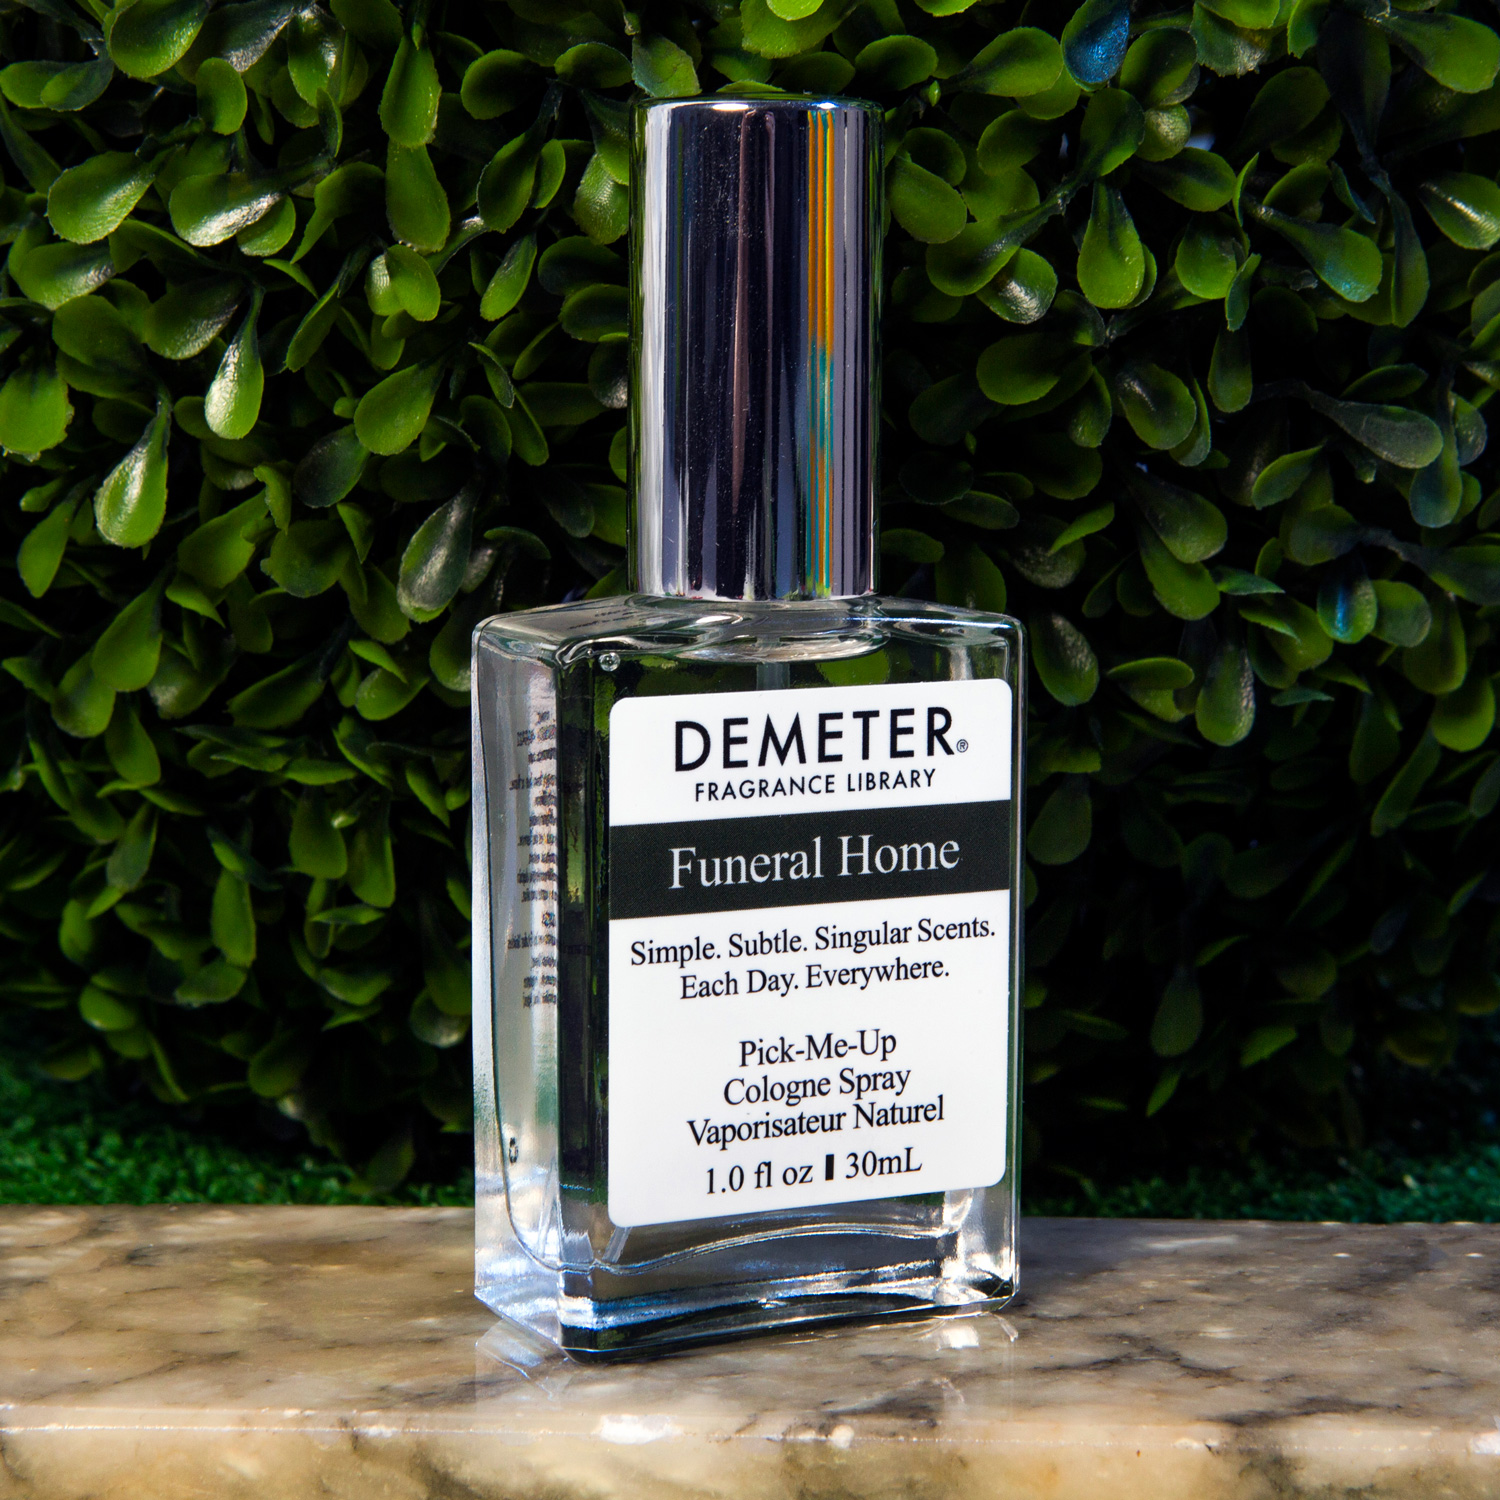 Funeral Home by Demeter Fragrance Library